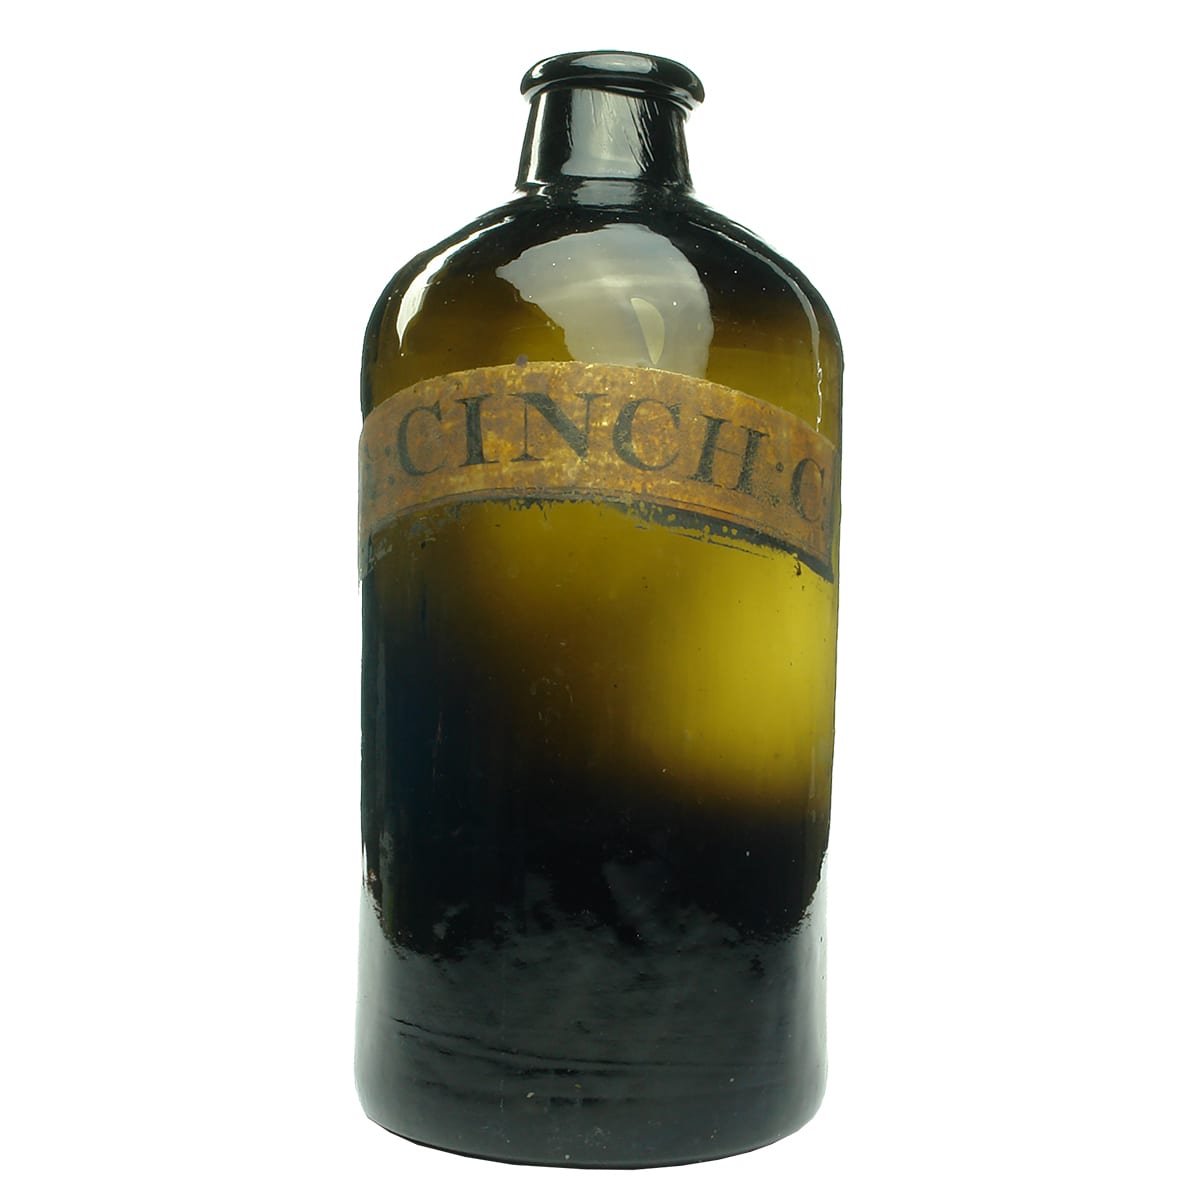 Giant Black Glass Apothecary Jar. Pontil scar and S. Maw, London to base.